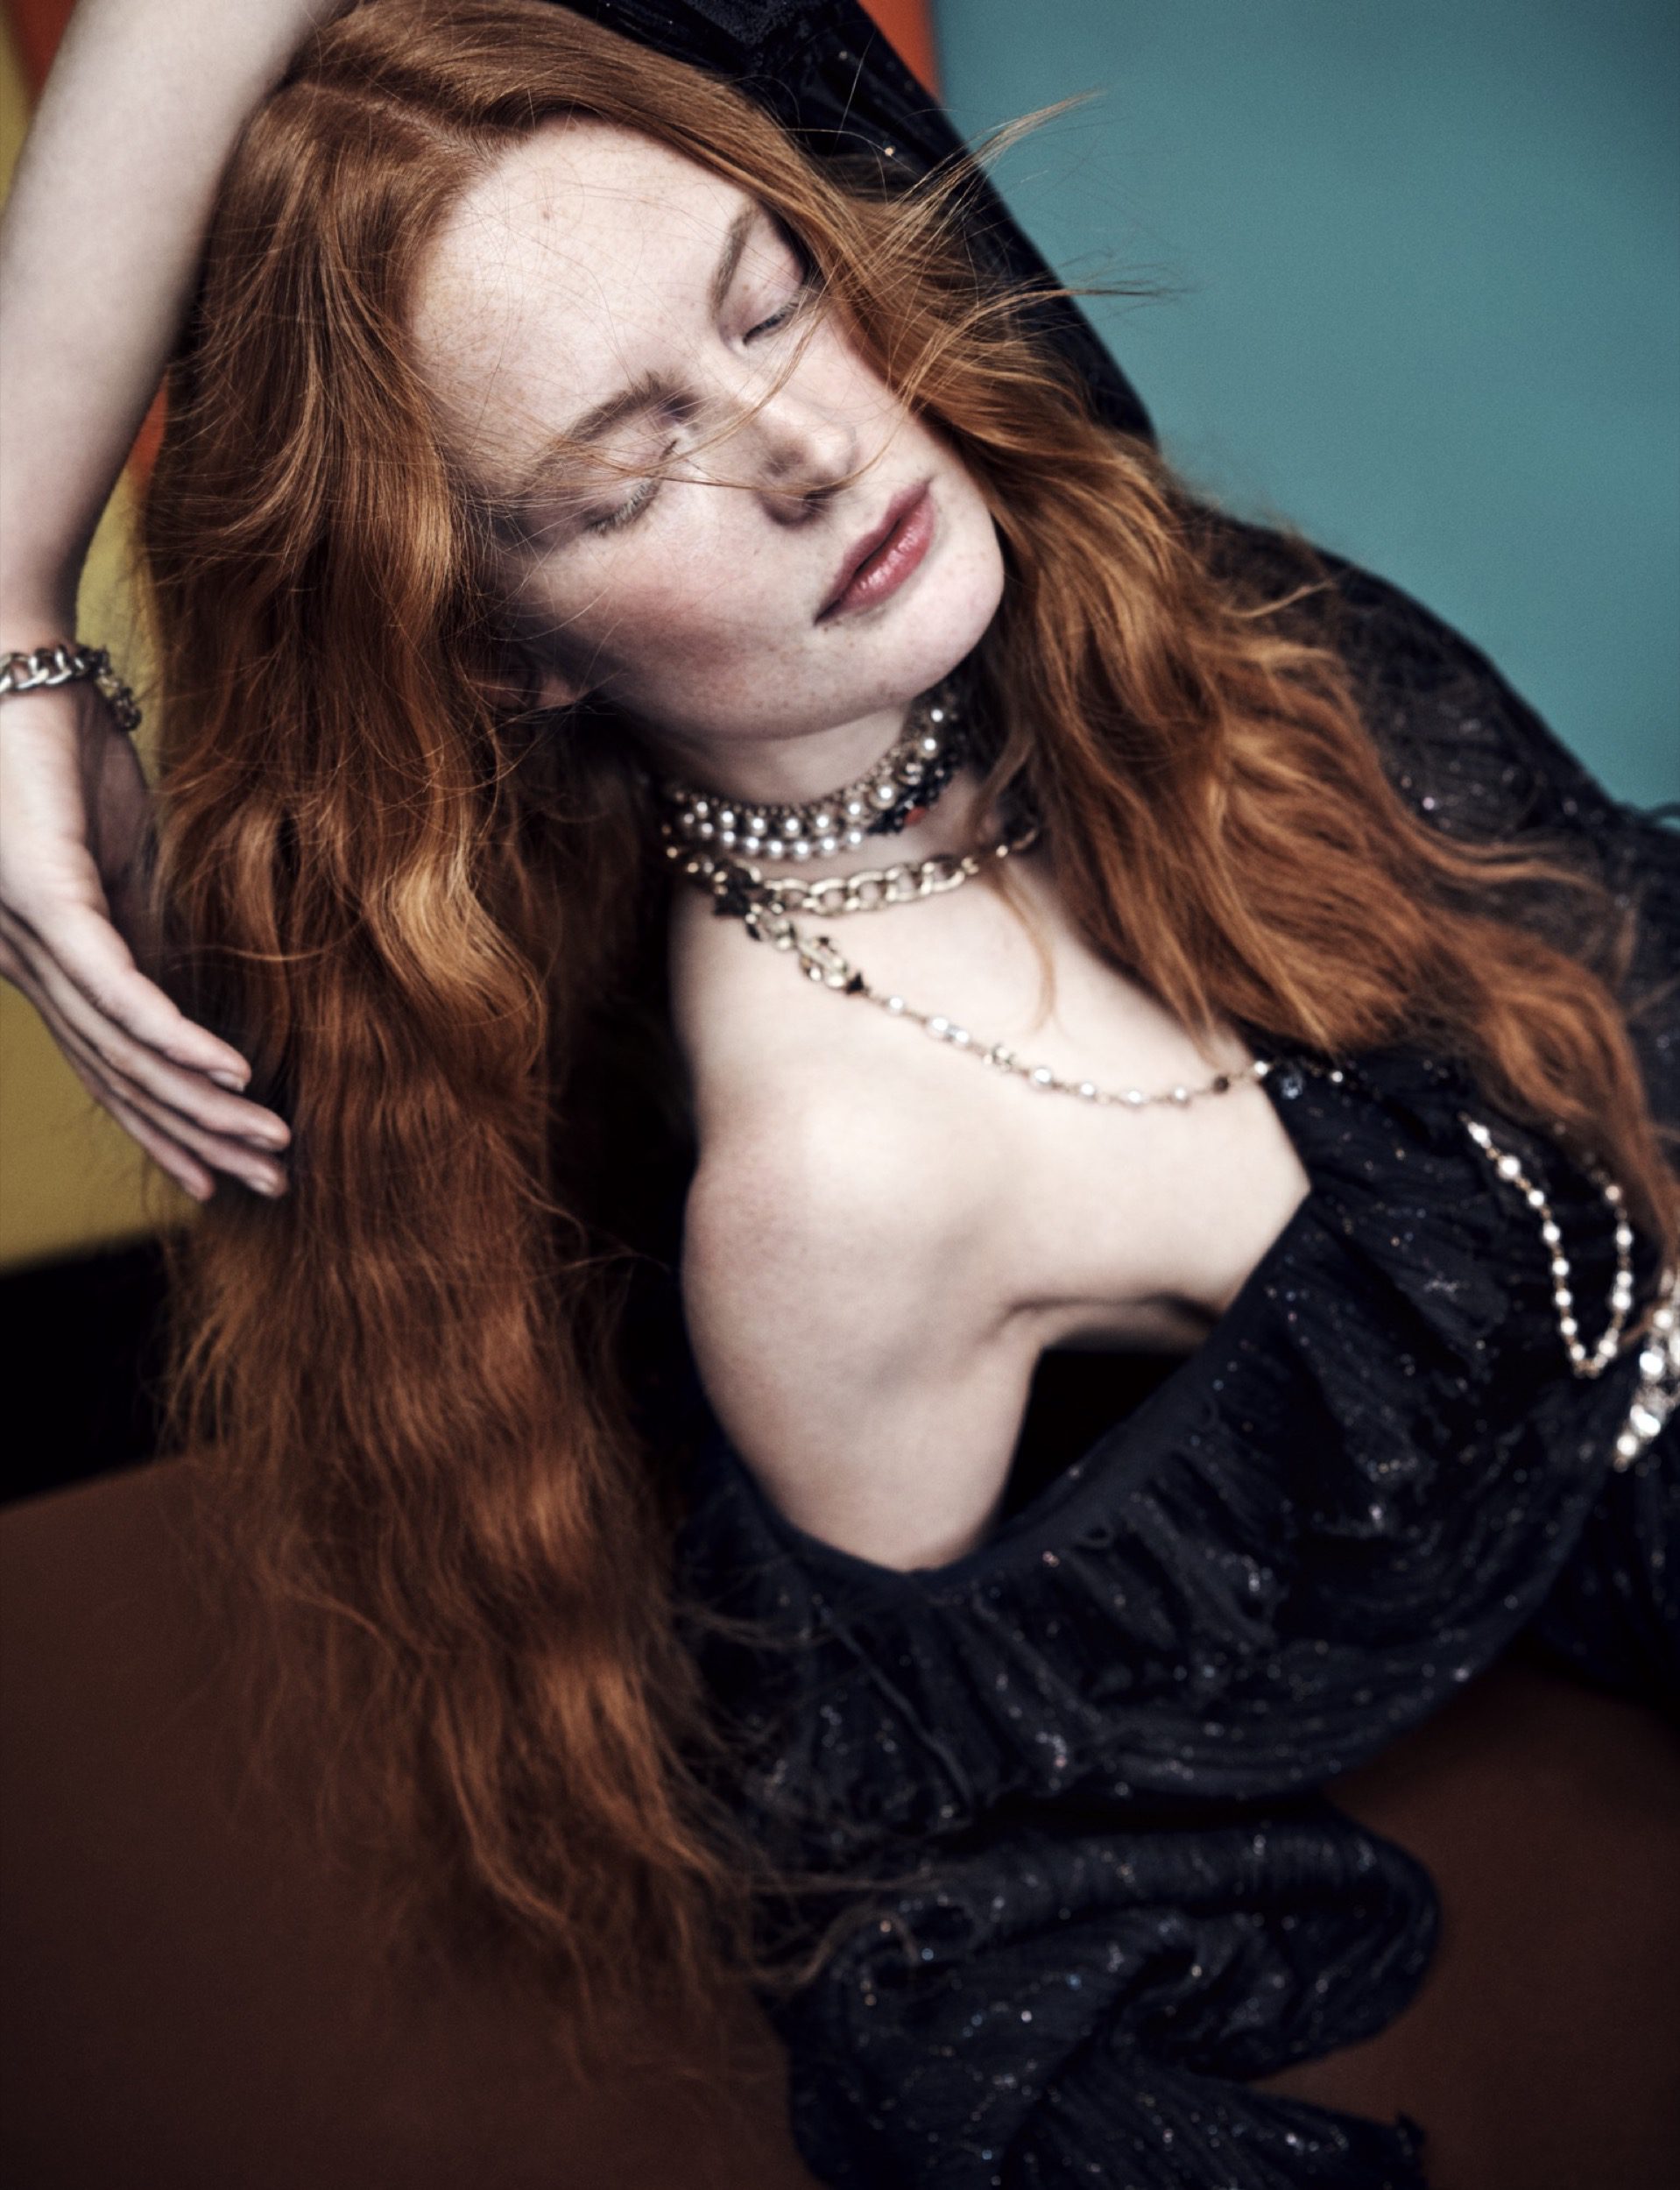 kathrin-hohberg-marie-claire-pre-raphaelite-jan-welters-04